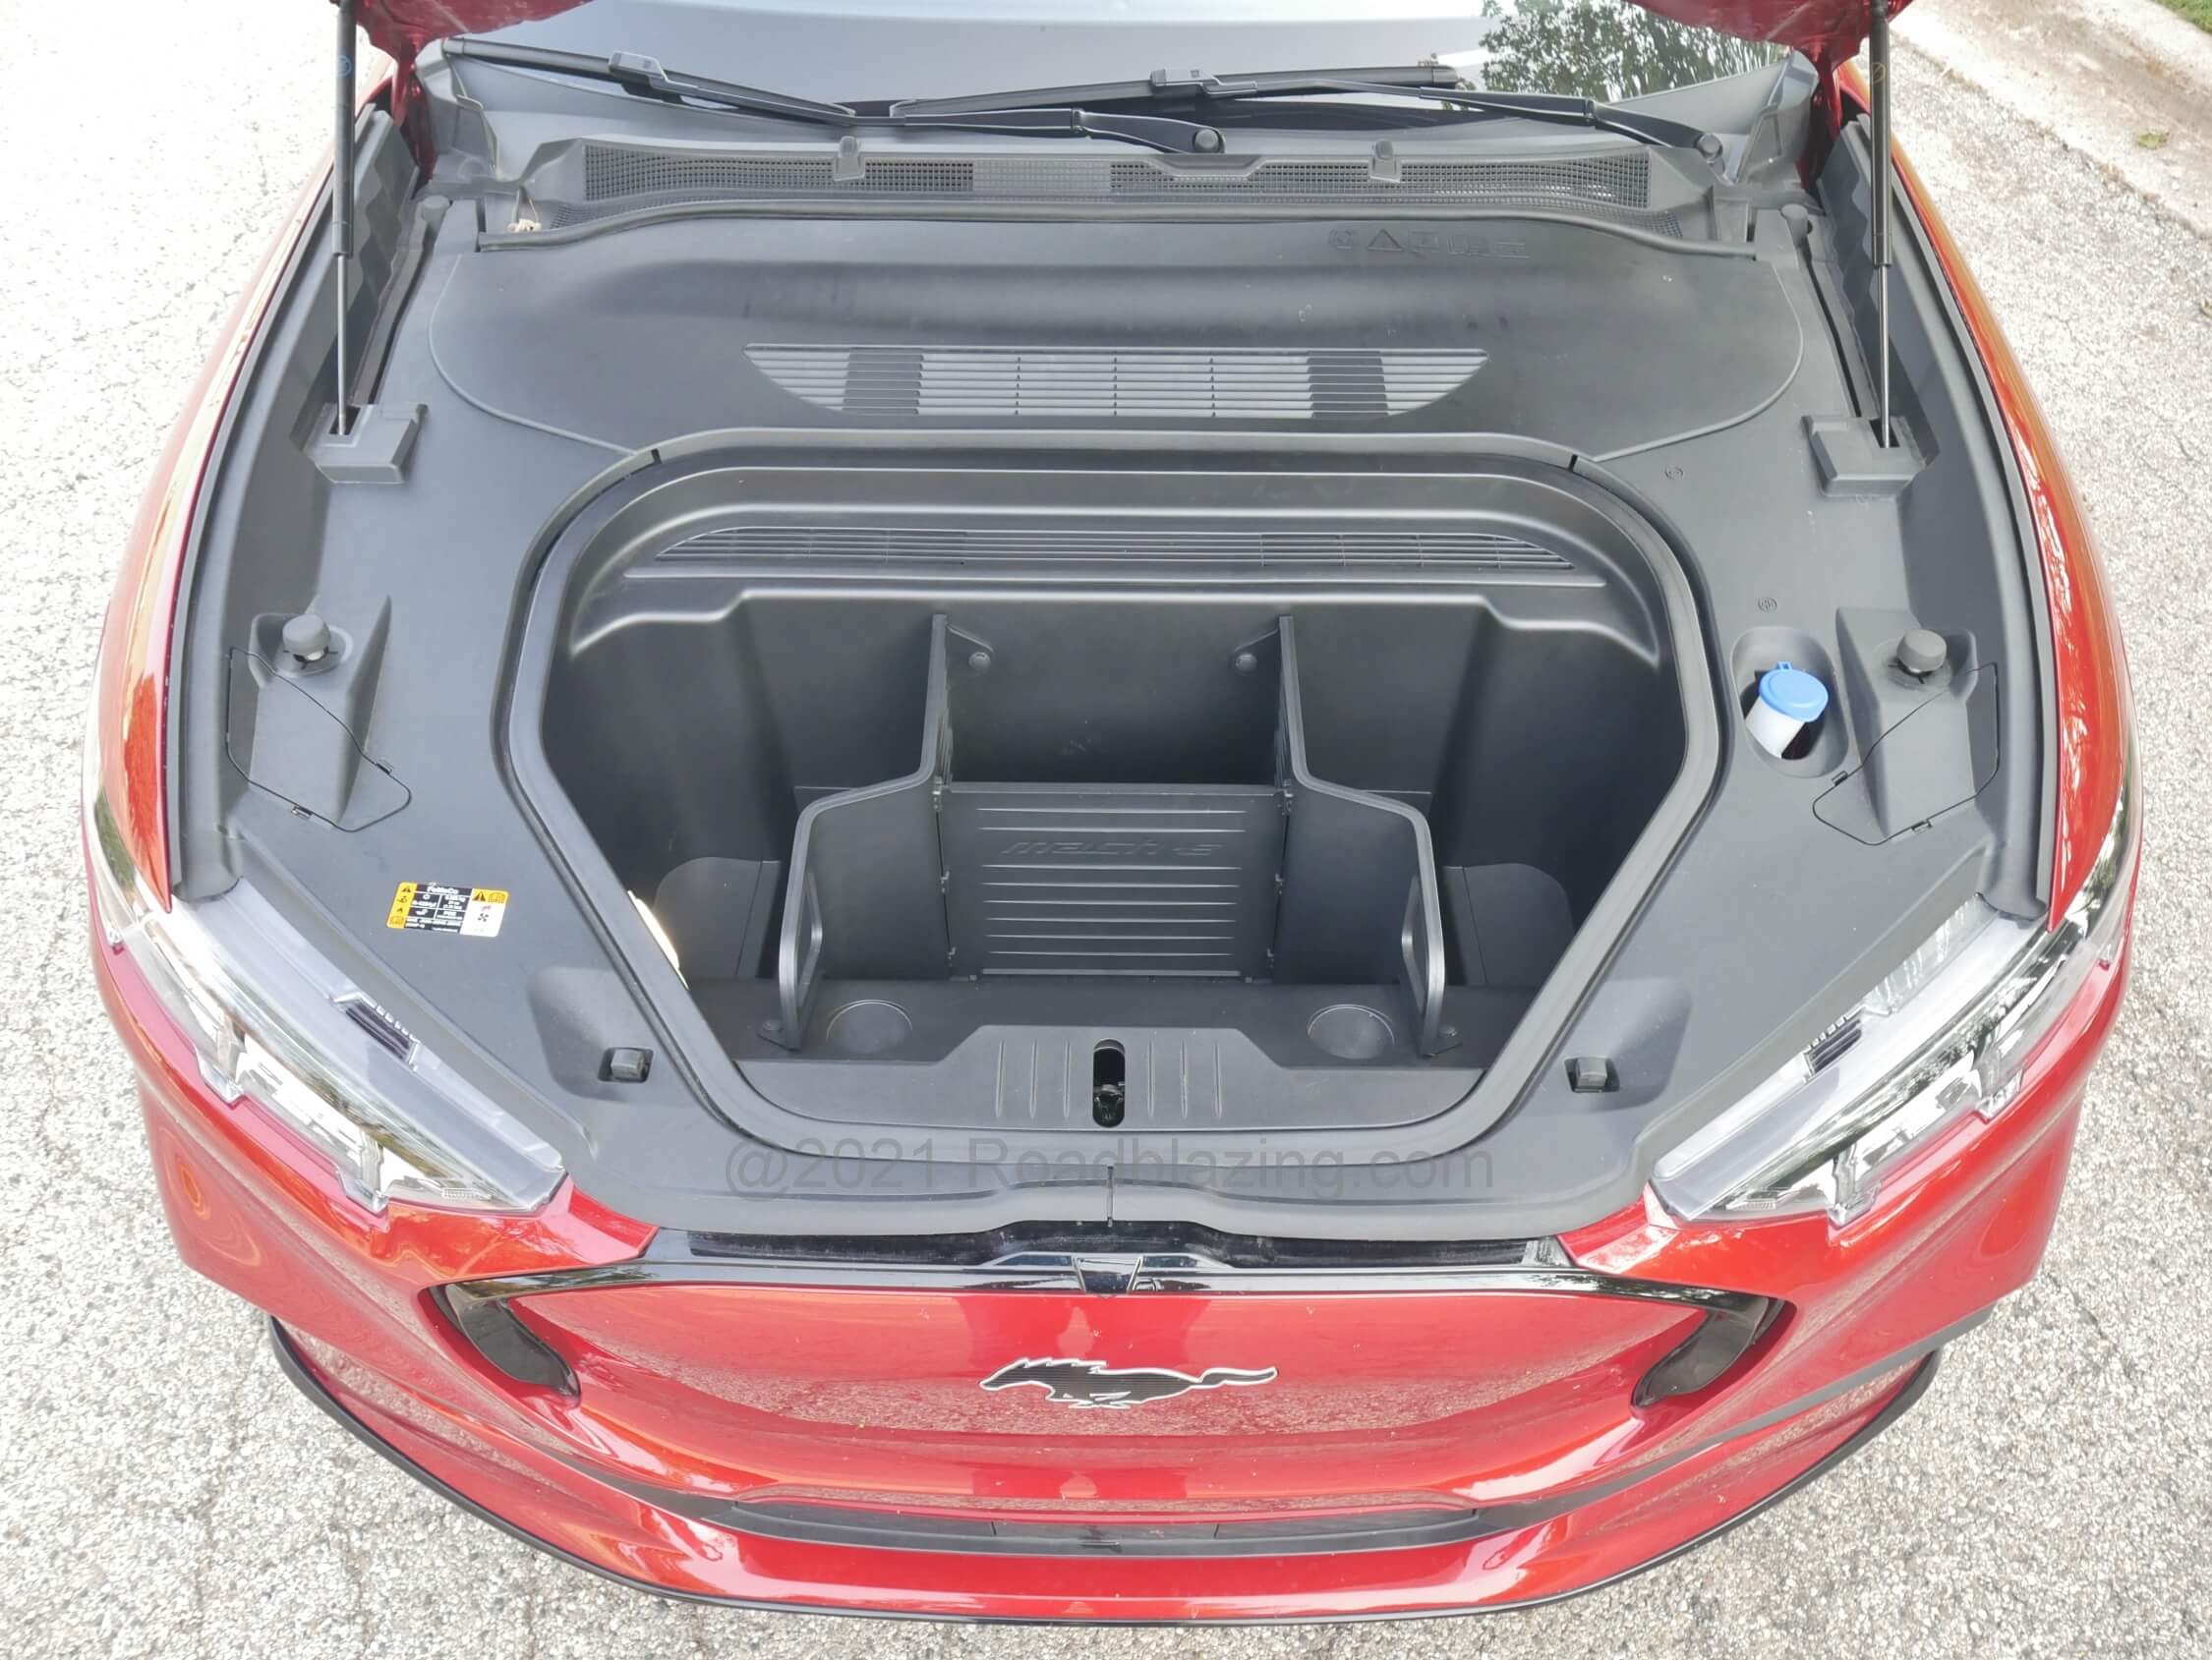 2021 Ford Mustang Mach-E Premium AWD: 4.7 cubic foot trunk in the front = Frunk. Cargo management is fixed but drains